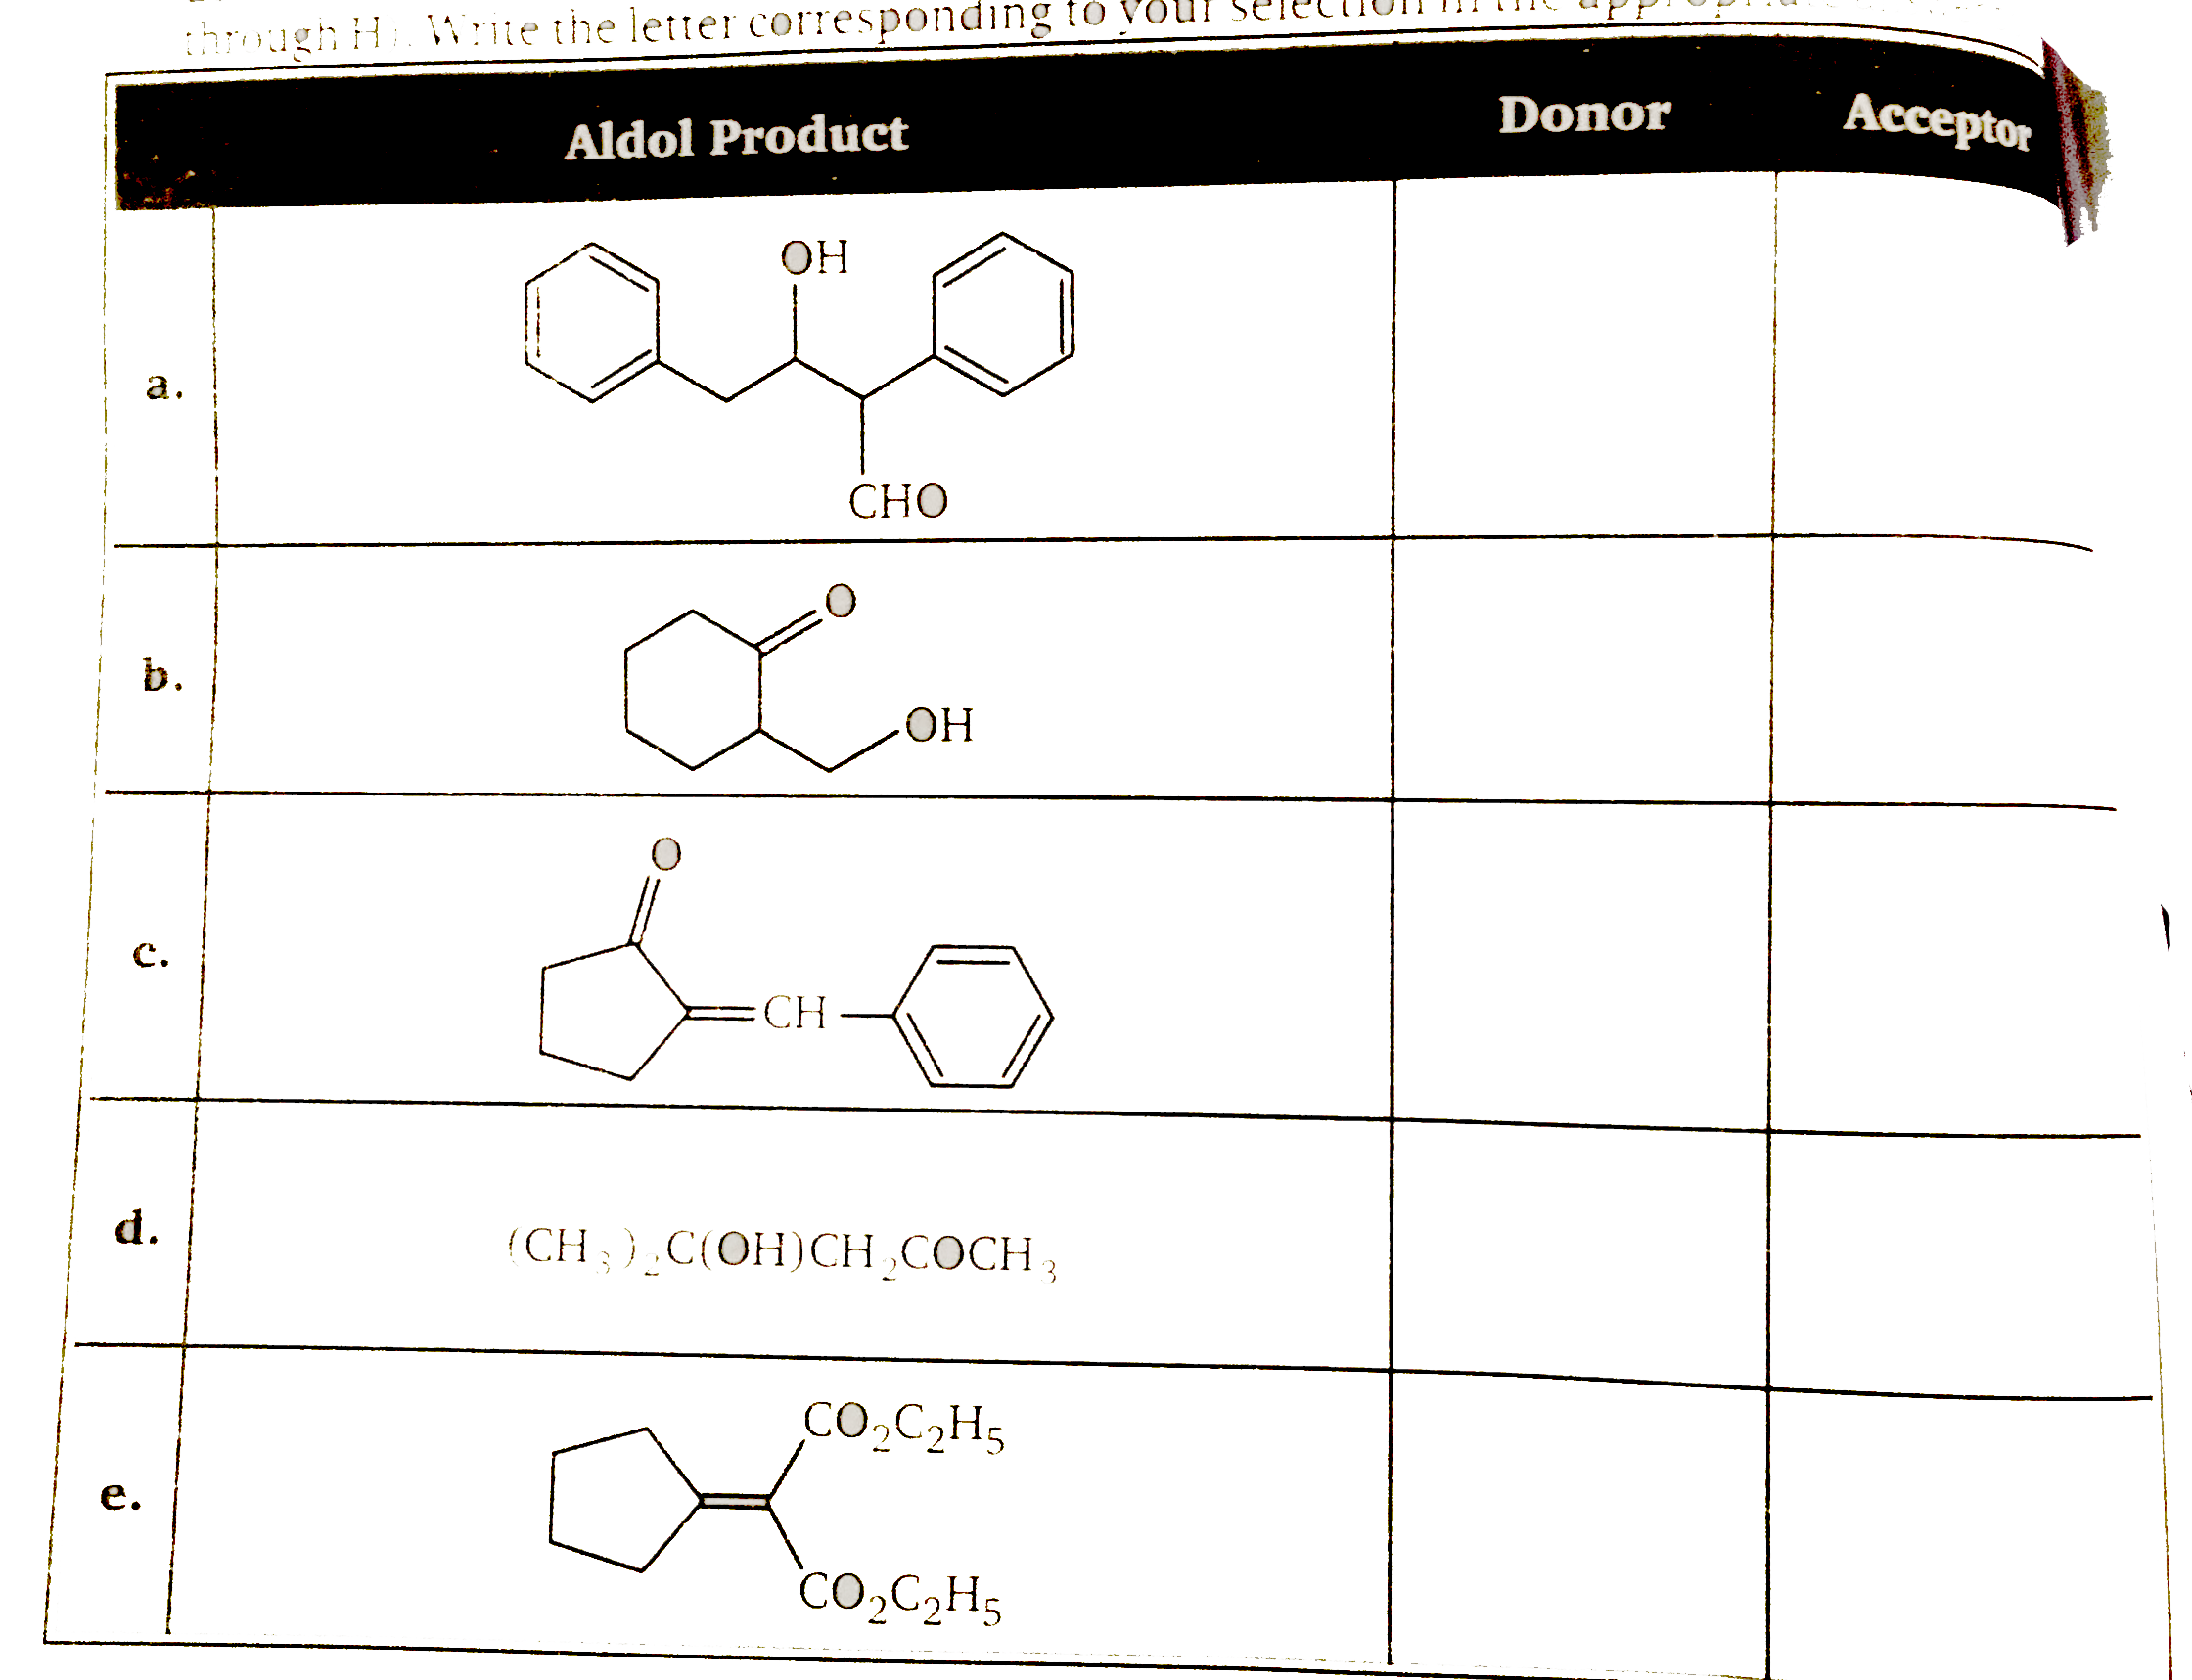 Aldol condensation proceeds by carbon-carbon bond formation between an enolate donor and a carbonyl acceptor. For each of the  following aldol products (a thorugh e) select a donor and an acceptor compound from the list at the bottom of the page (compounds A through H). write the letter corresponding to your selection in the appropriate answer box.   .   Q. .